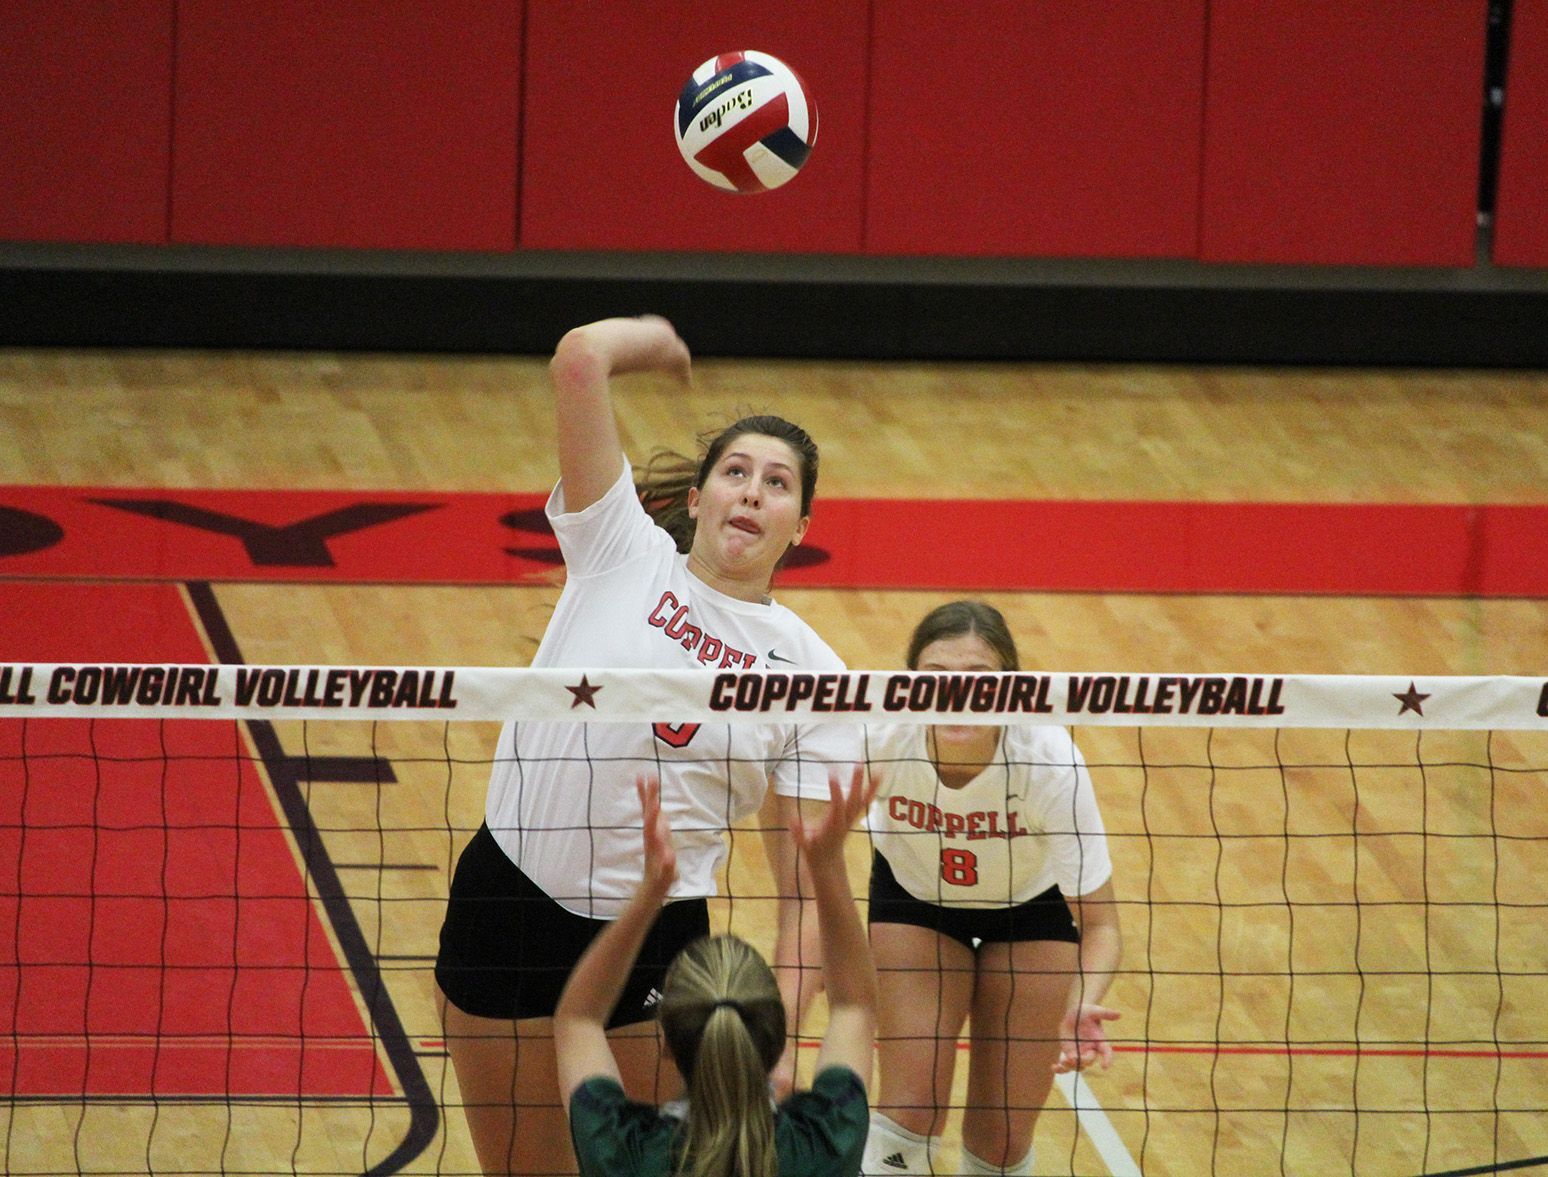 Gilliland reflects on volleyball career at Coppell Sports starlocalmedia